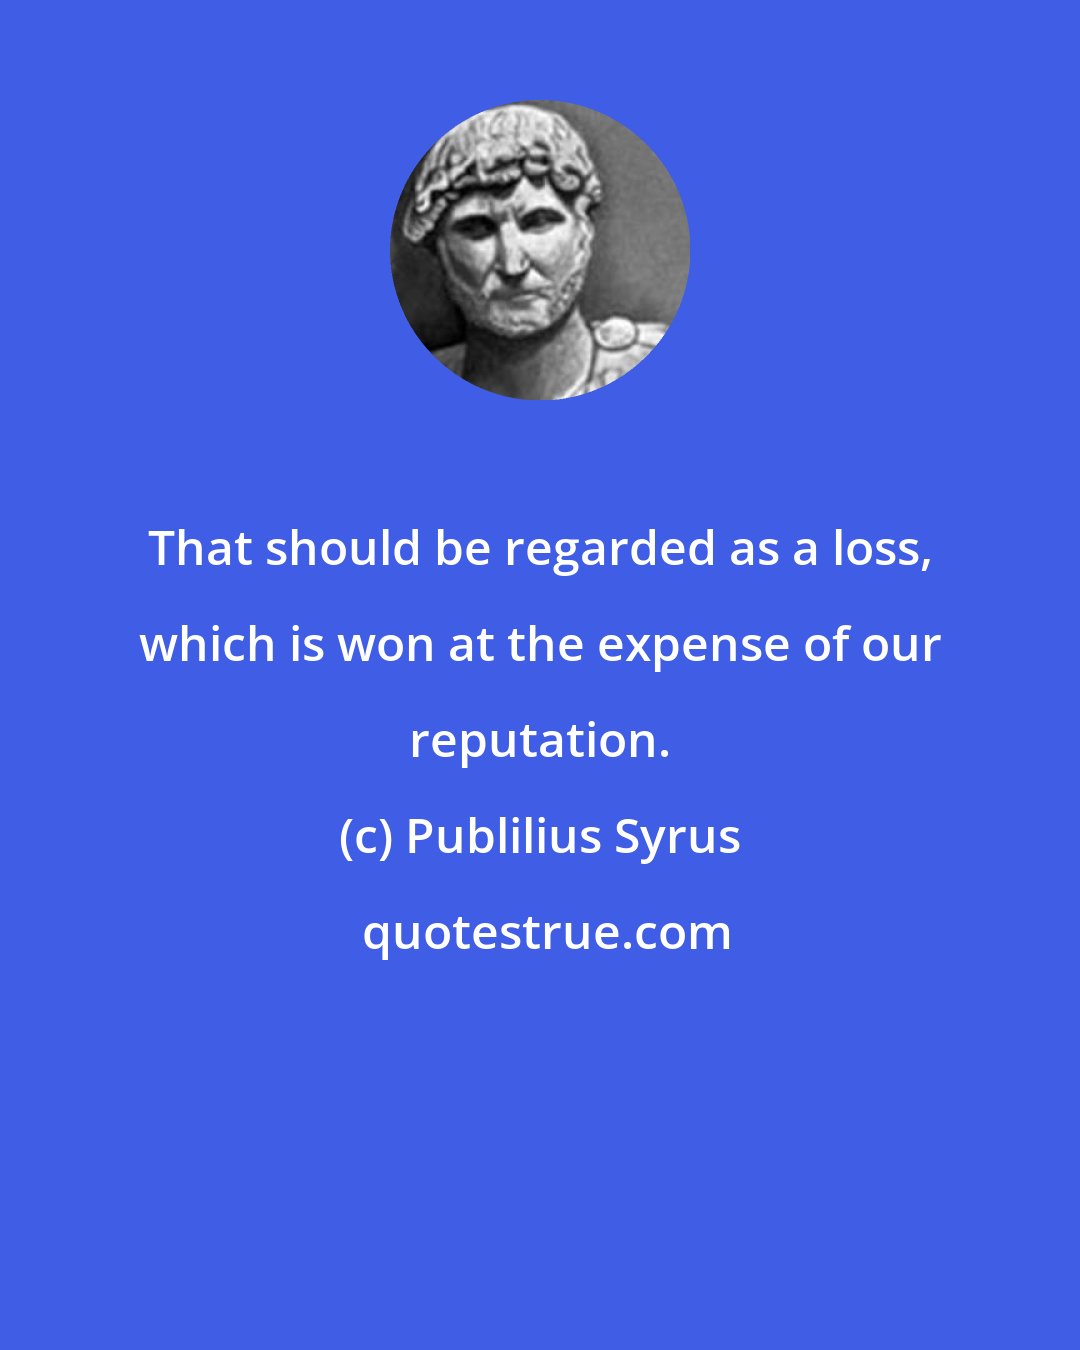 Publilius Syrus: That should be regarded as a loss, which is won at the expense of our reputation.